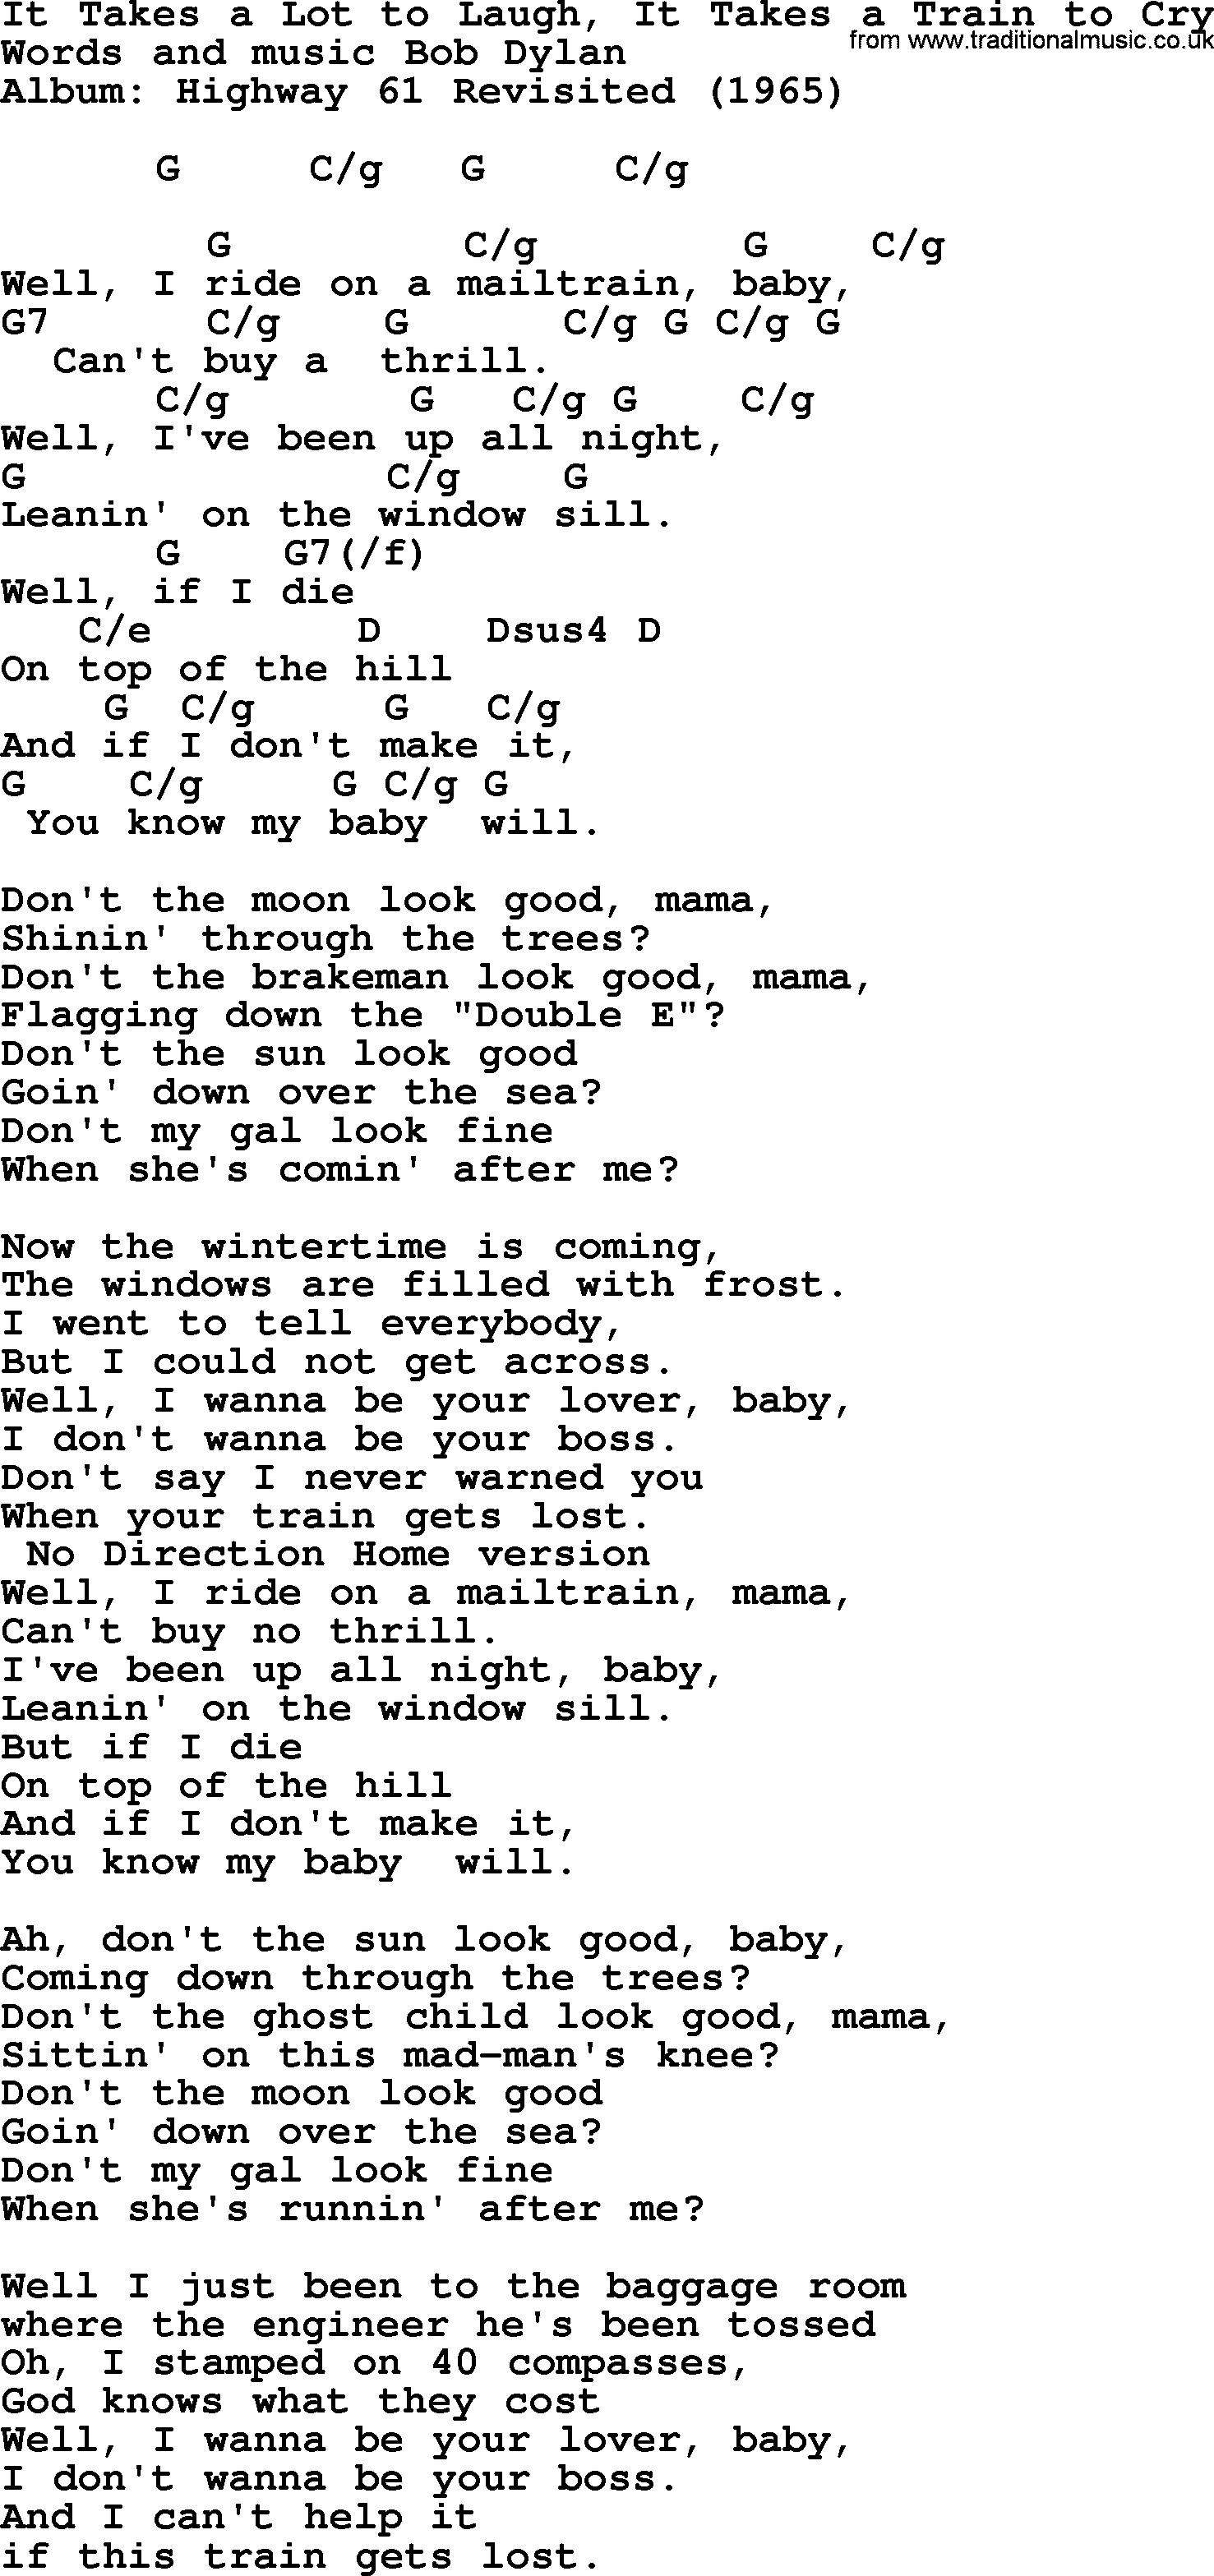 Bob Dylan song, lyrics with chords - It Takes a Lot to Laugh, It Takes a Train to Cry